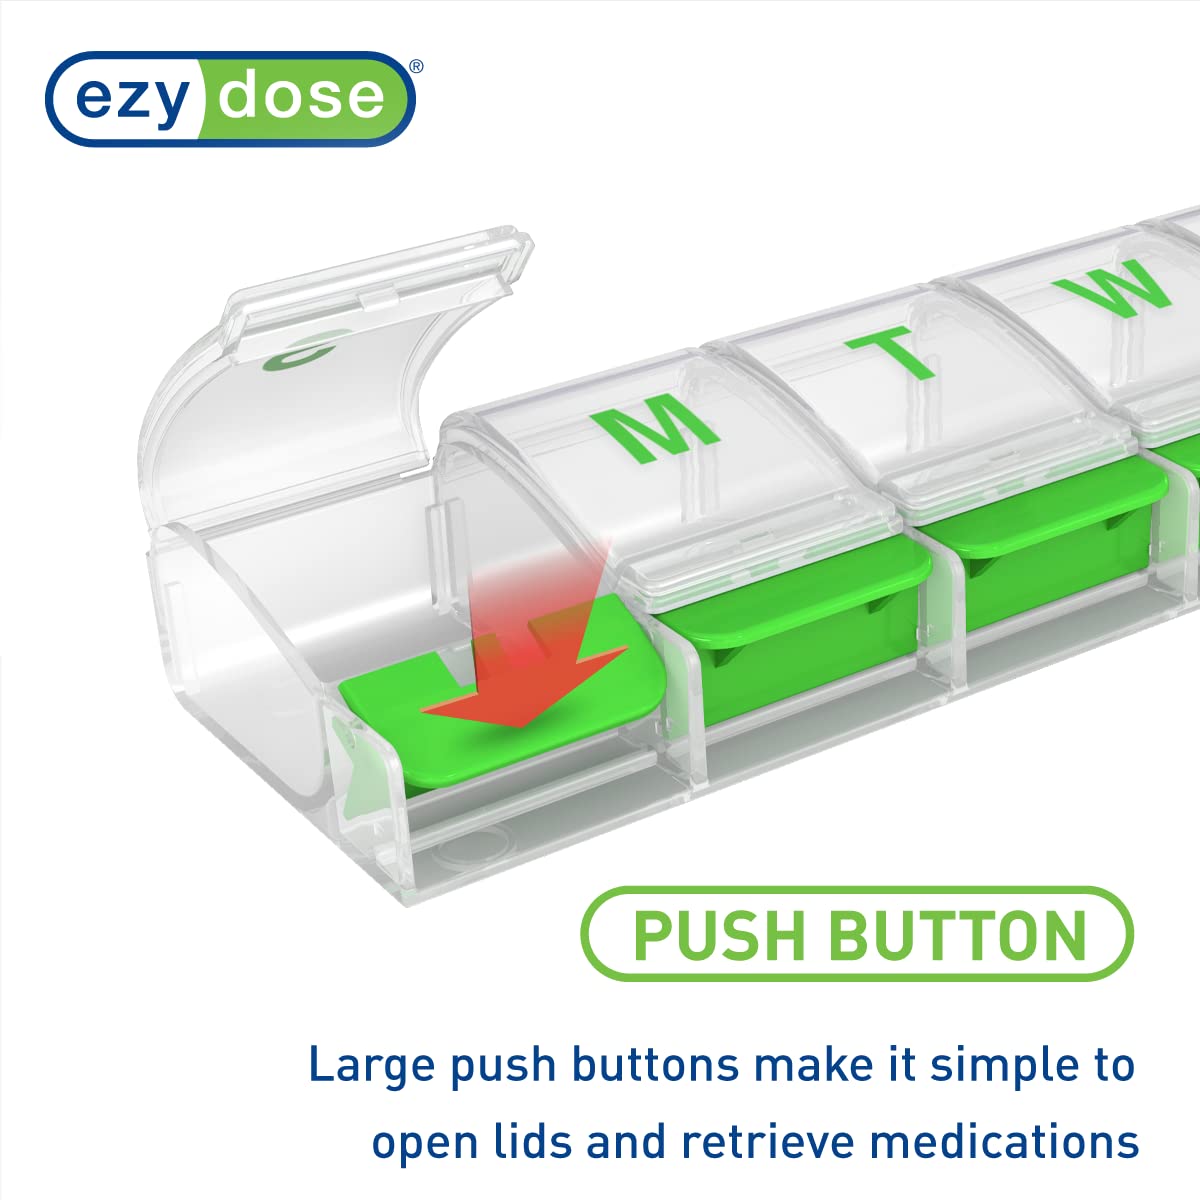 EZY DOSE Weekly (7-Day) Pill Planner, Medicine Case, Vitamin Organizer Box, X-Large Push-Button Compartments, Green